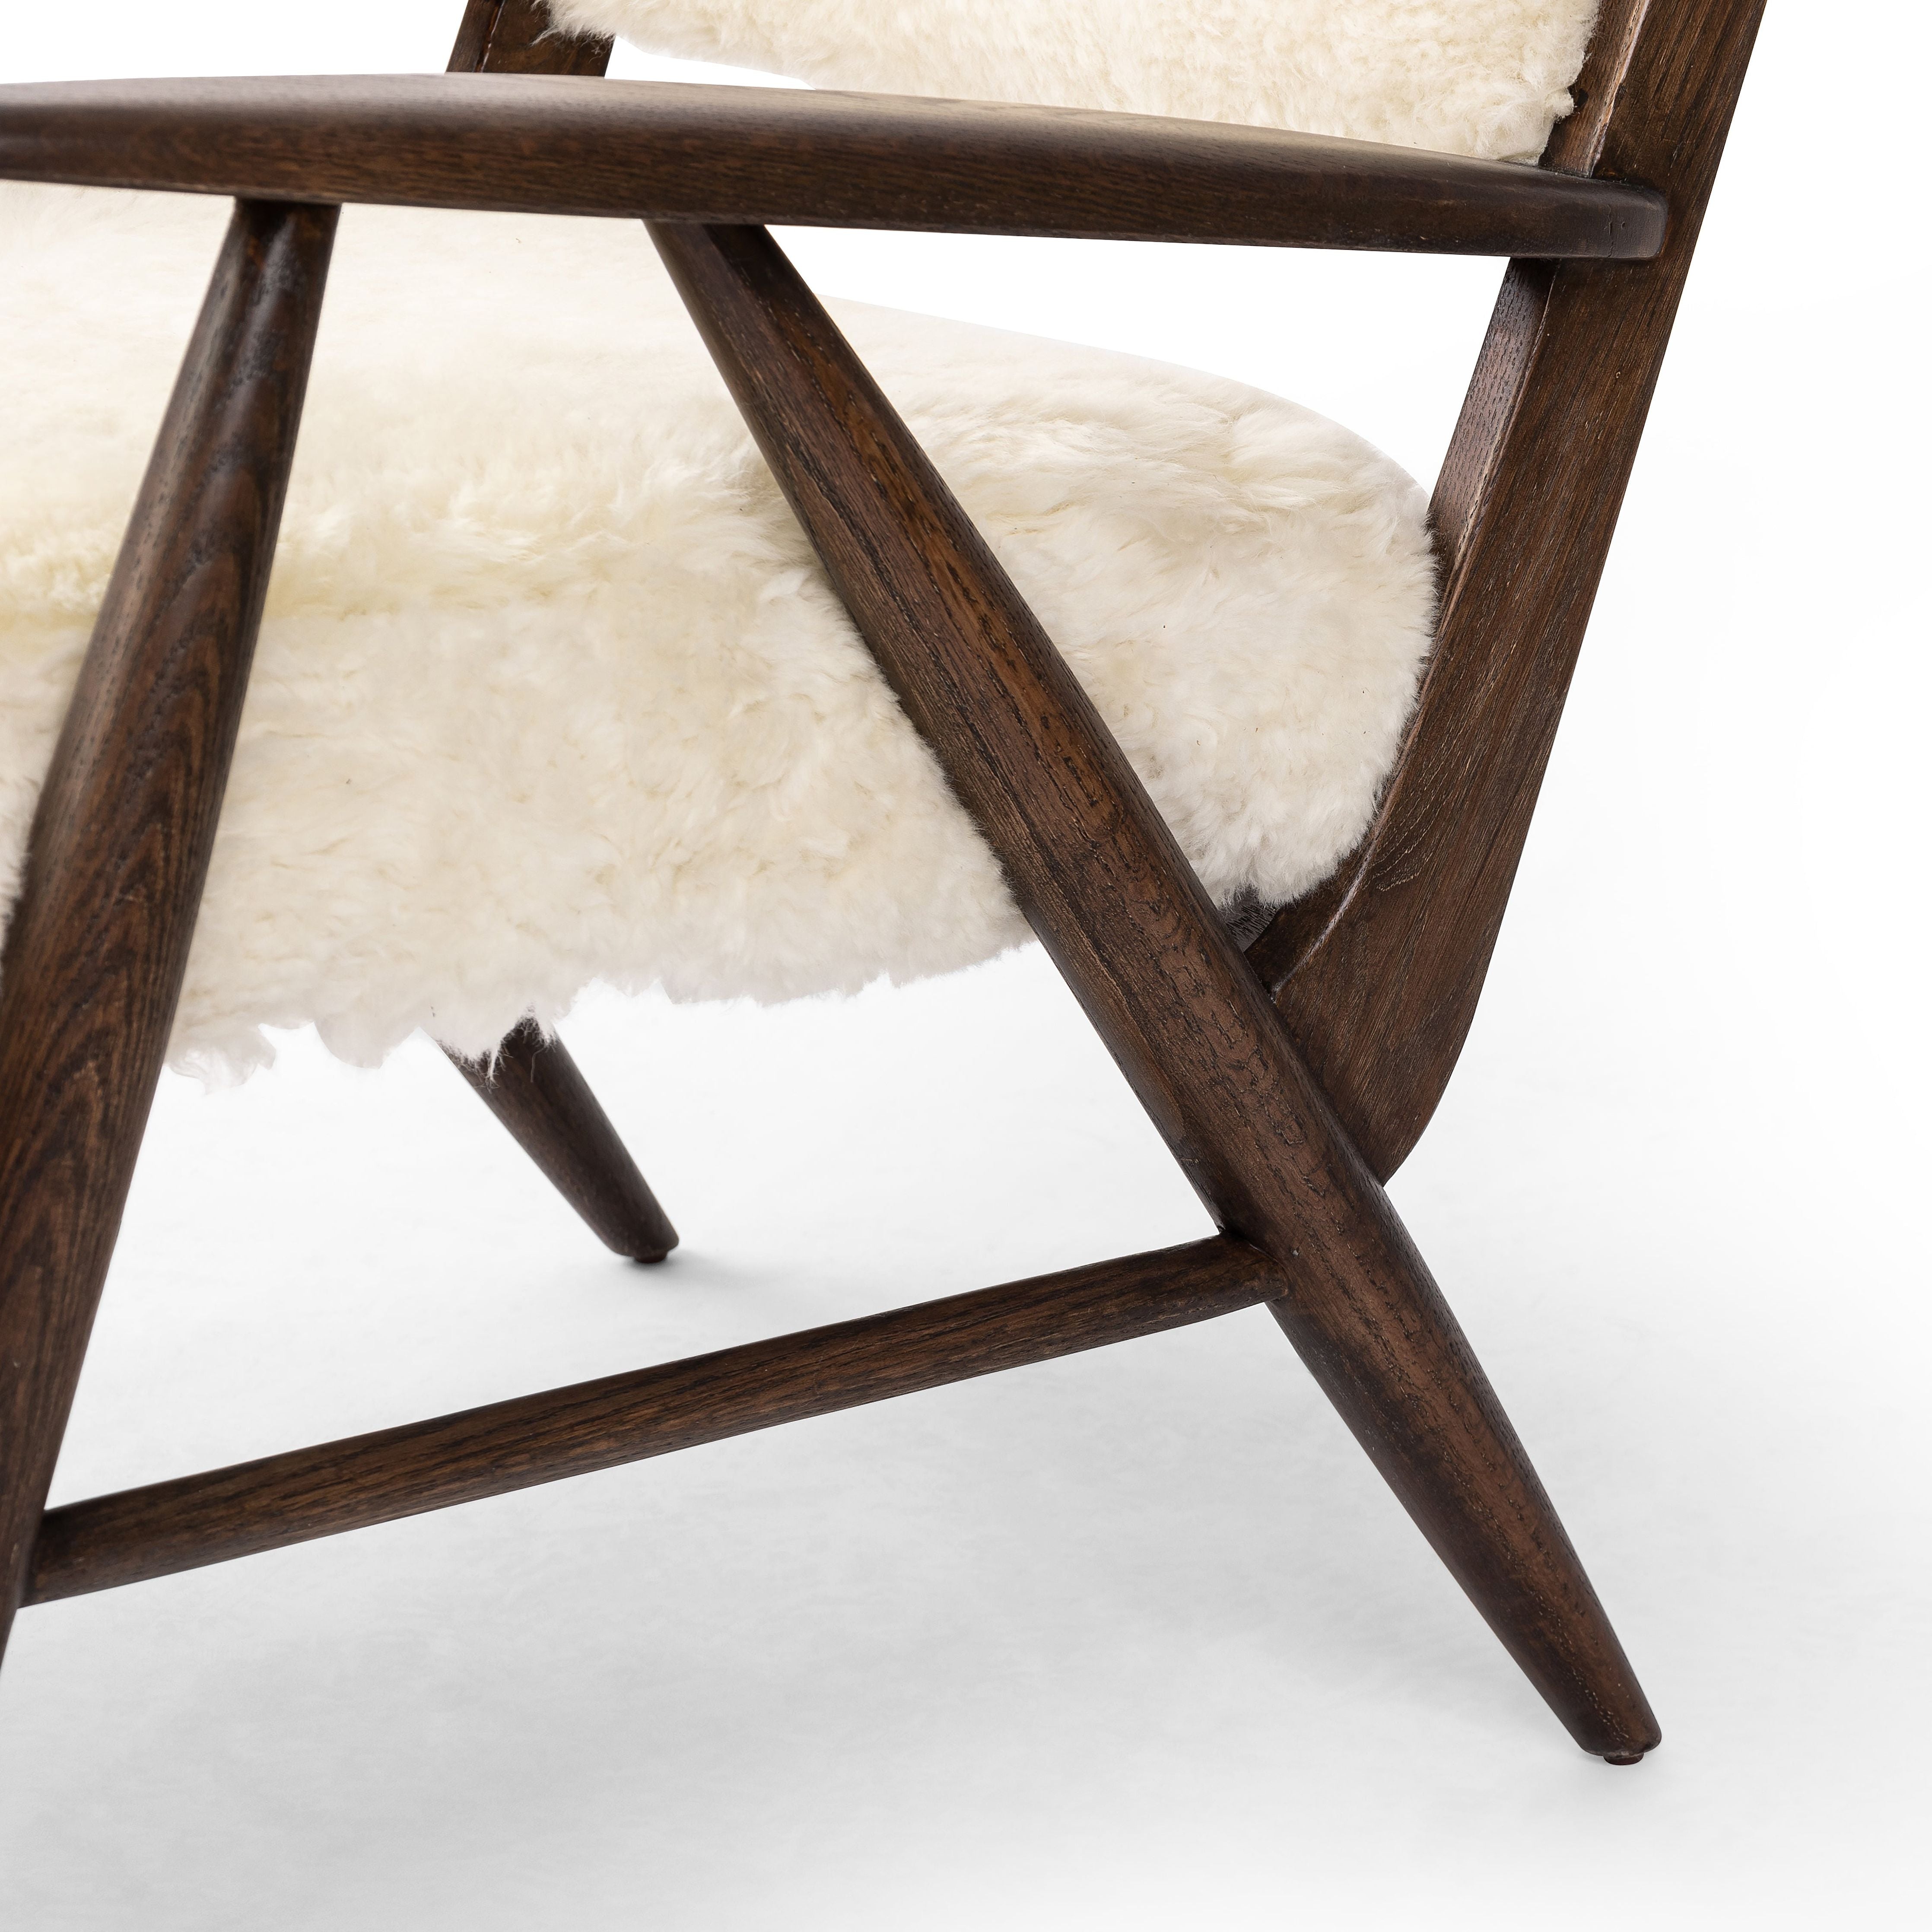 A modern take on the vintage school chair, upholstered in plush cream shearling of 100% sheepskin. Perfect as an accent chair or in pairs. Amethyst Home provides interior design, new construction, custom furniture, and area rugs in the Laguna Beach metro area.